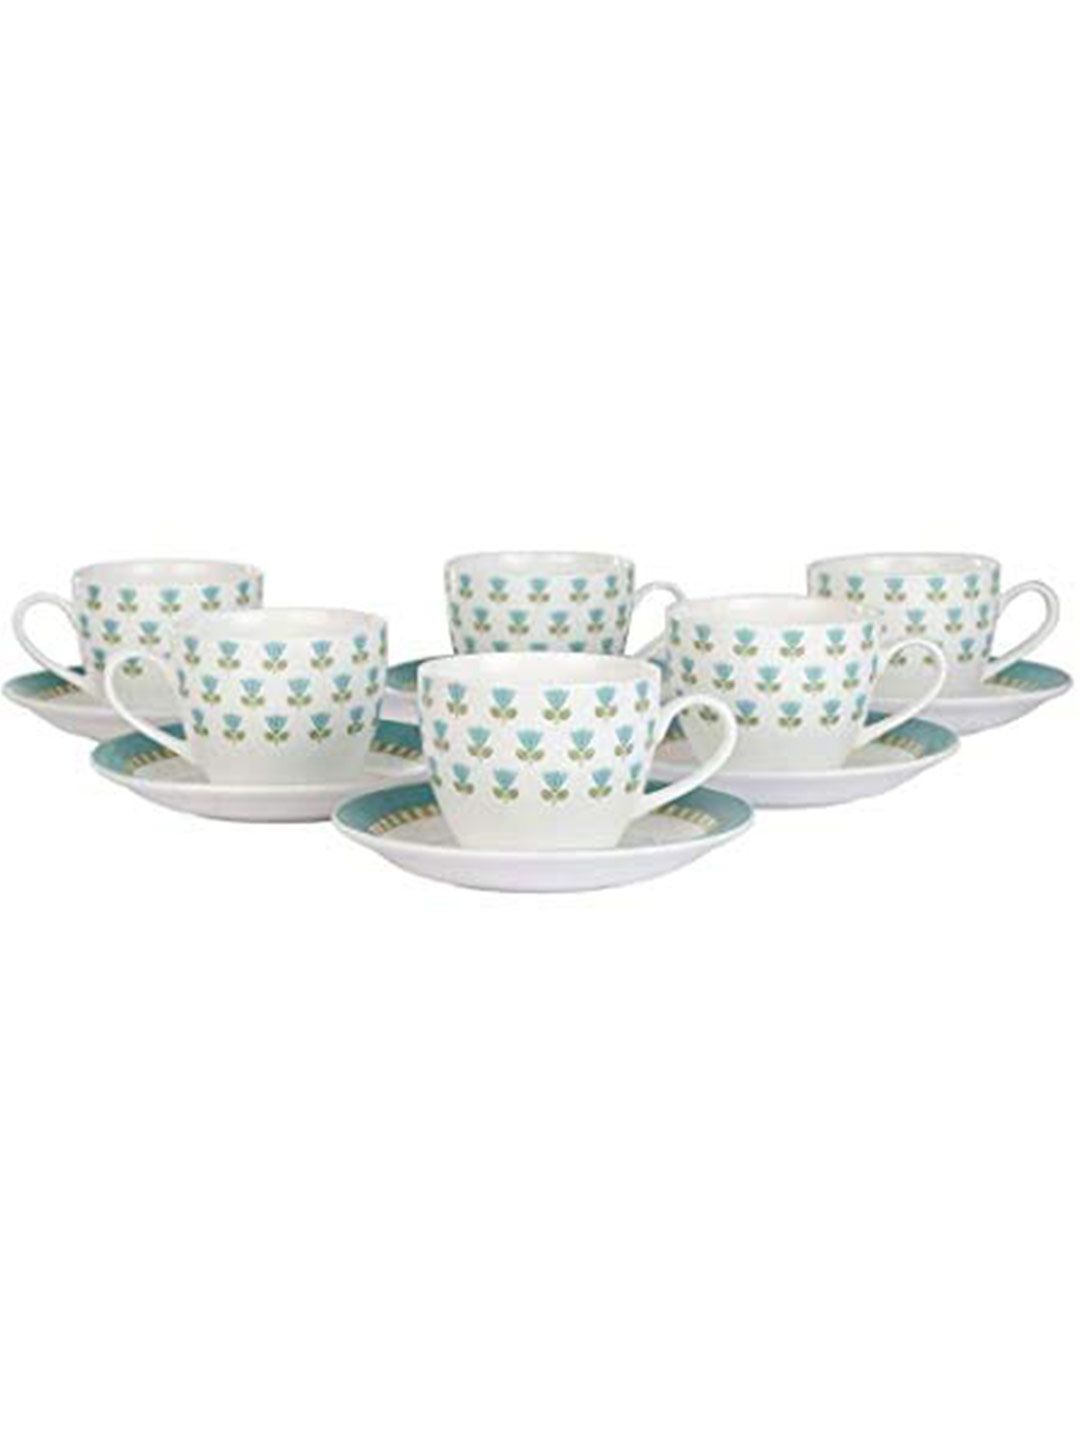 Femora 12 Pieces White & Teal Blue Printed Bone China Glossy Cups & Saucers Set Price in India